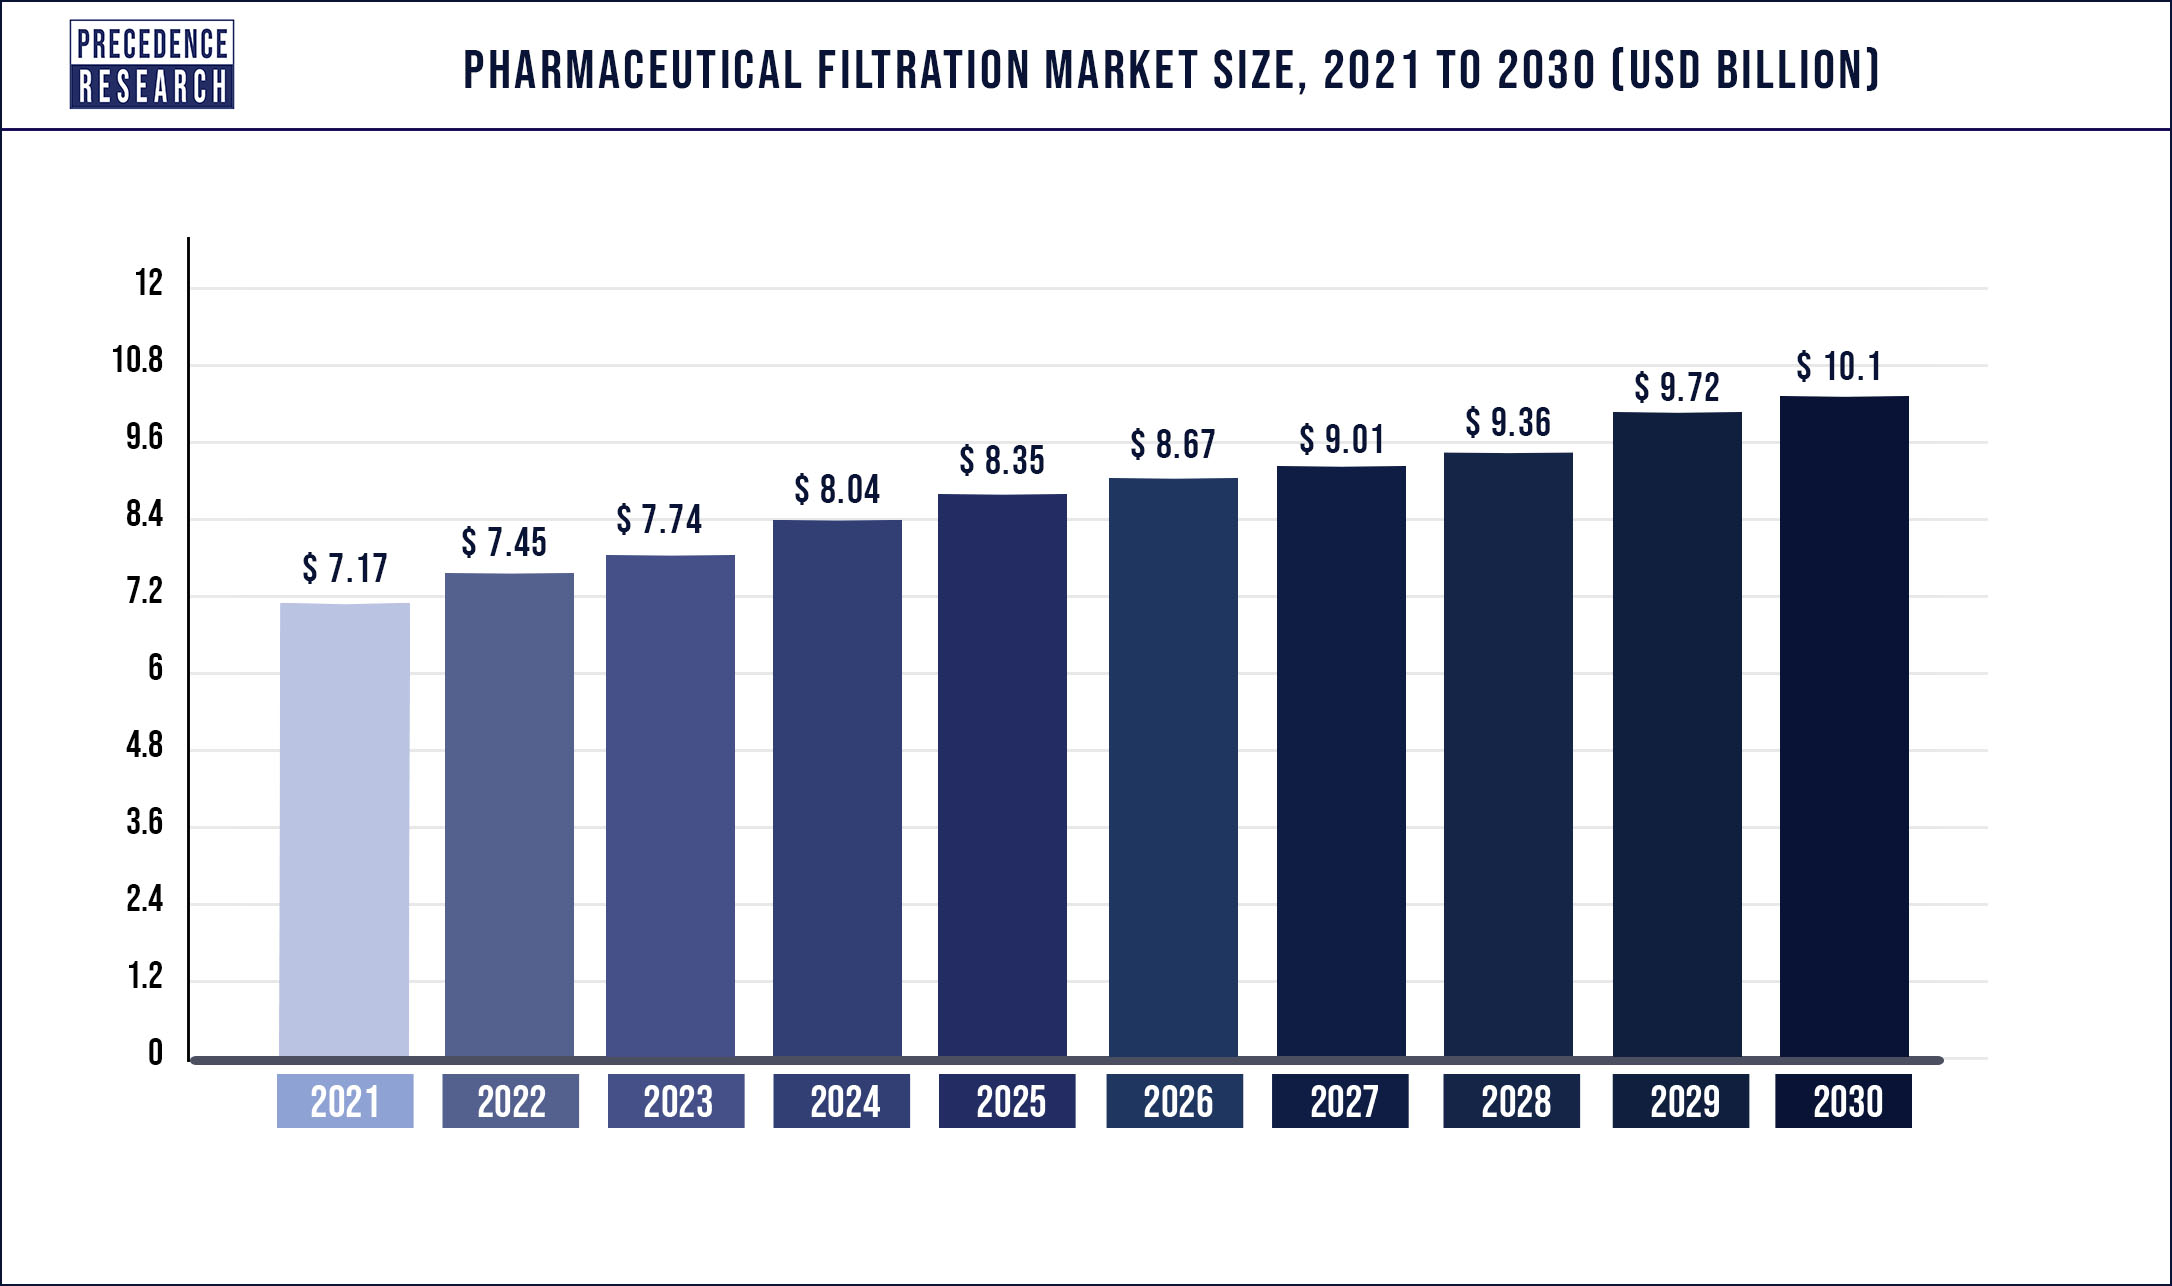 Pharmaceutical Filtration